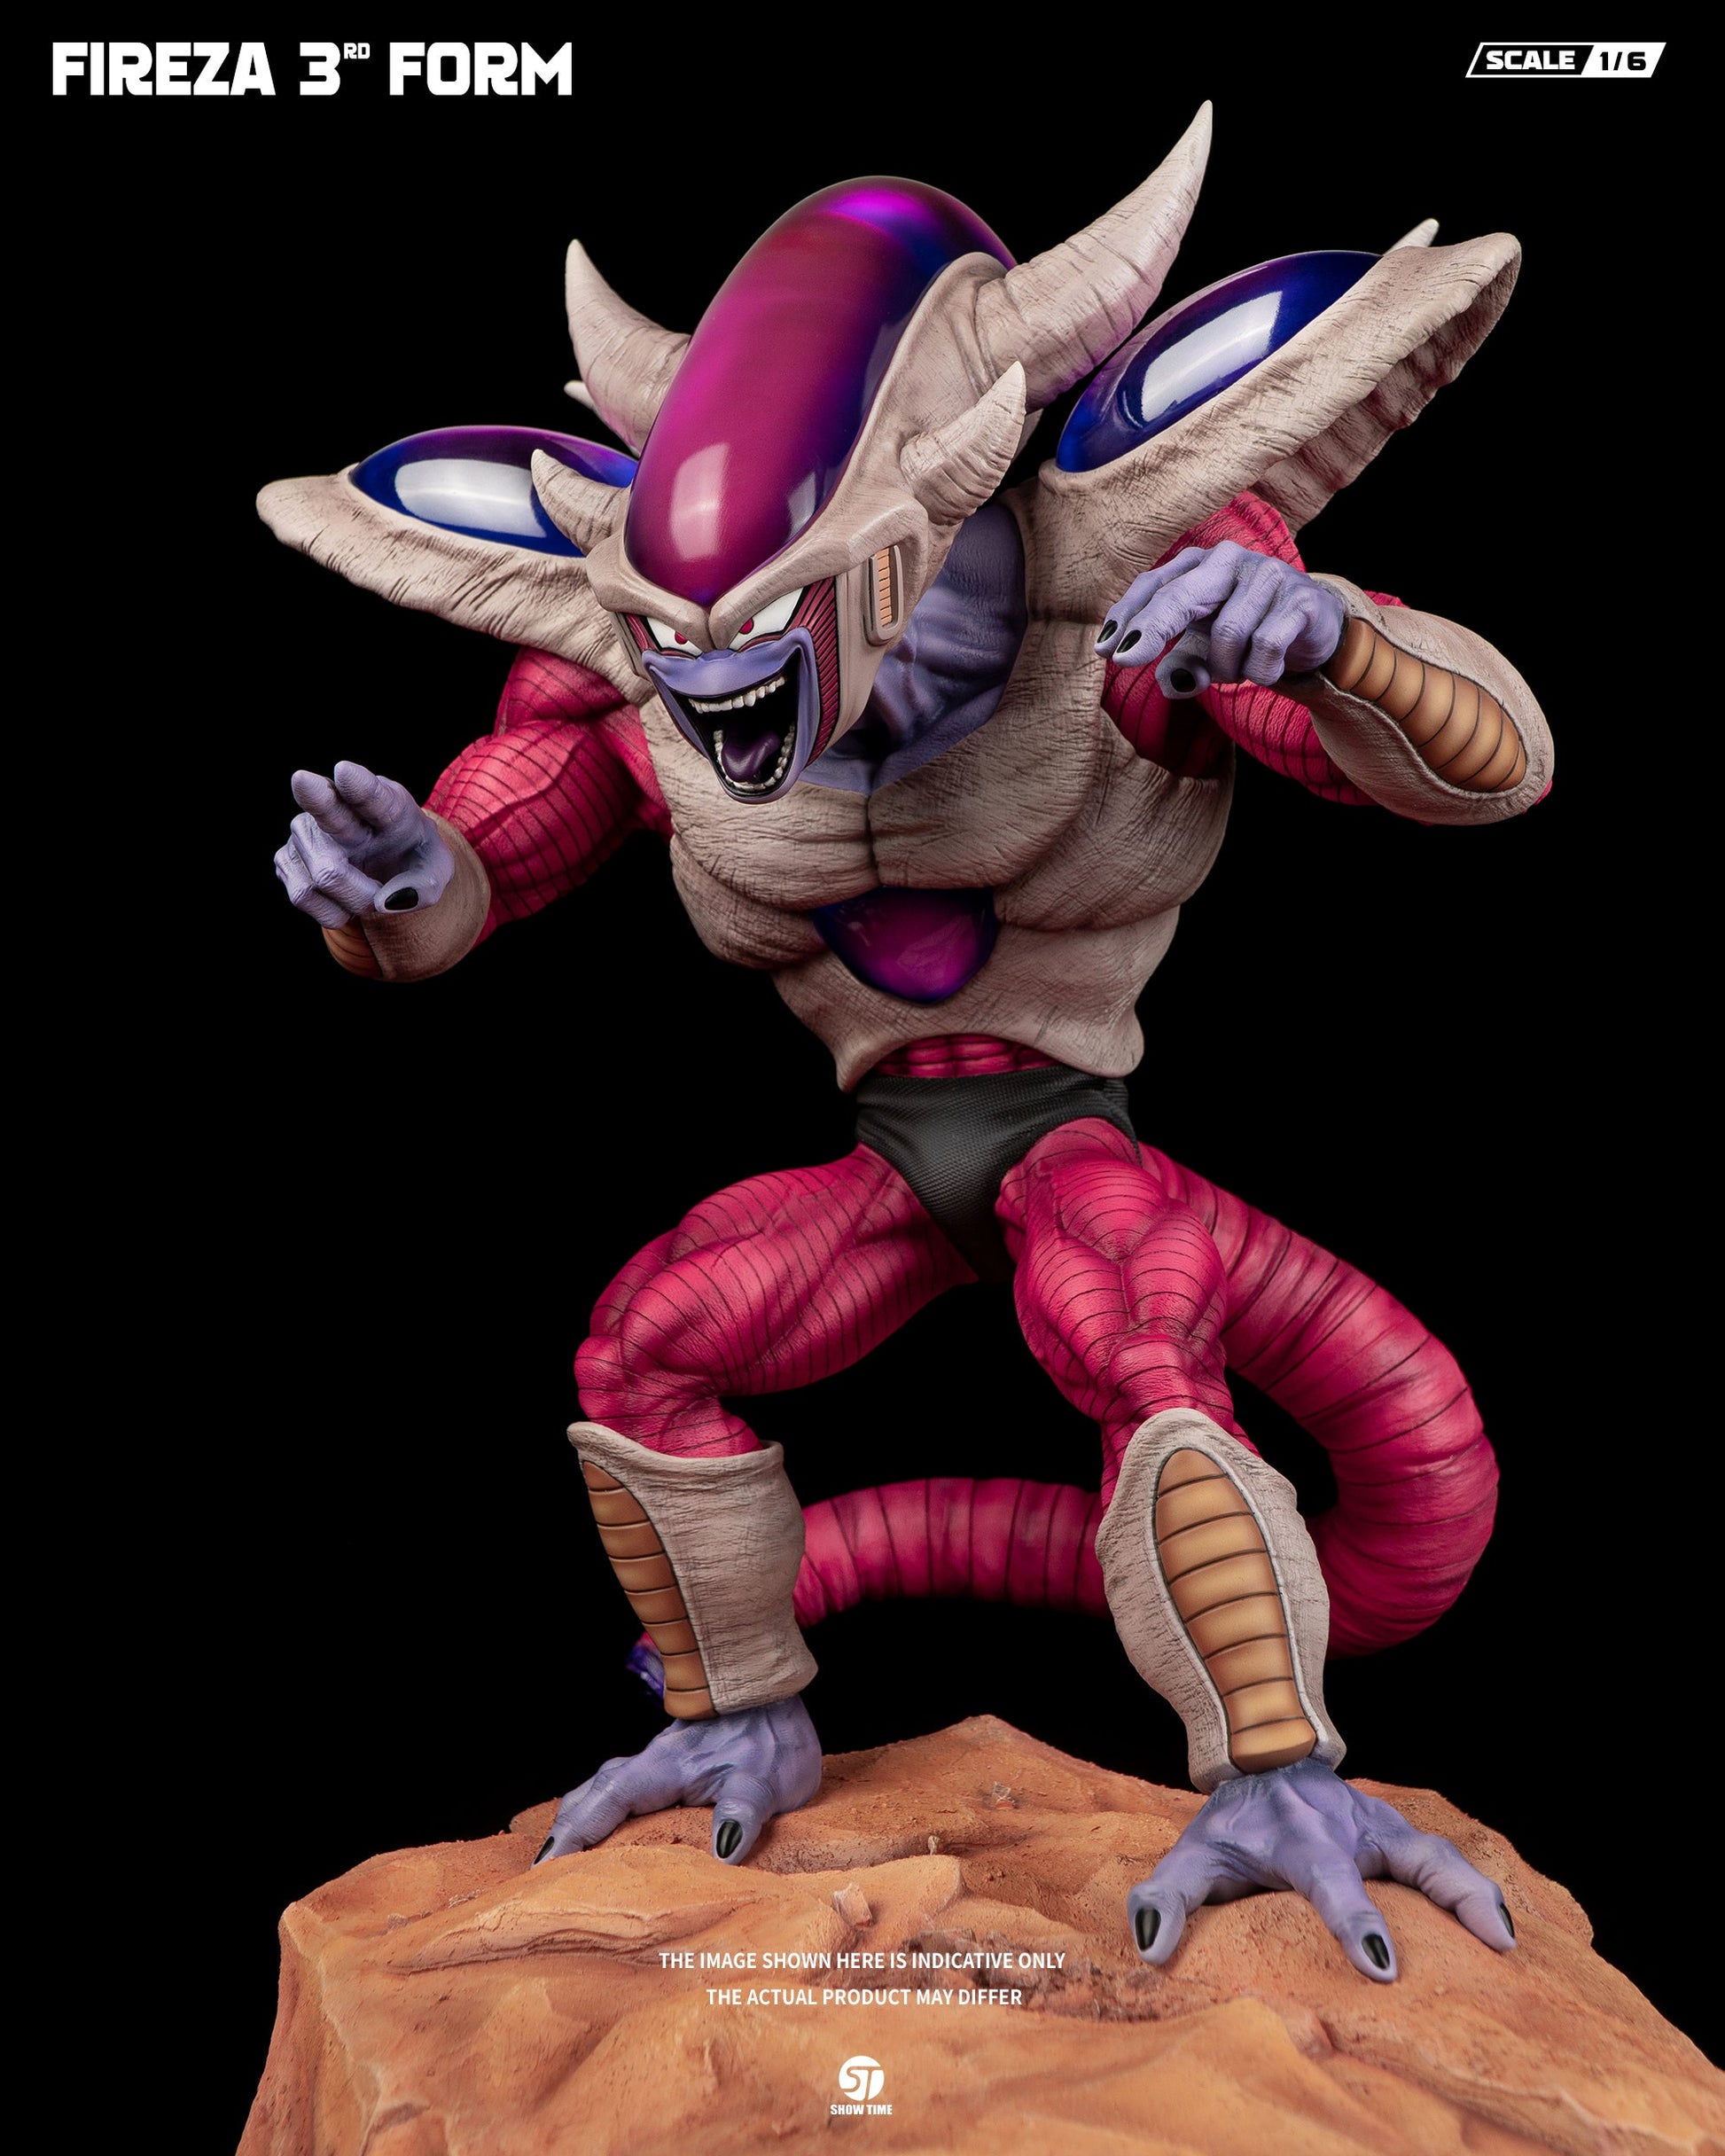 Show Time - Frieza Third Form StatueCorp